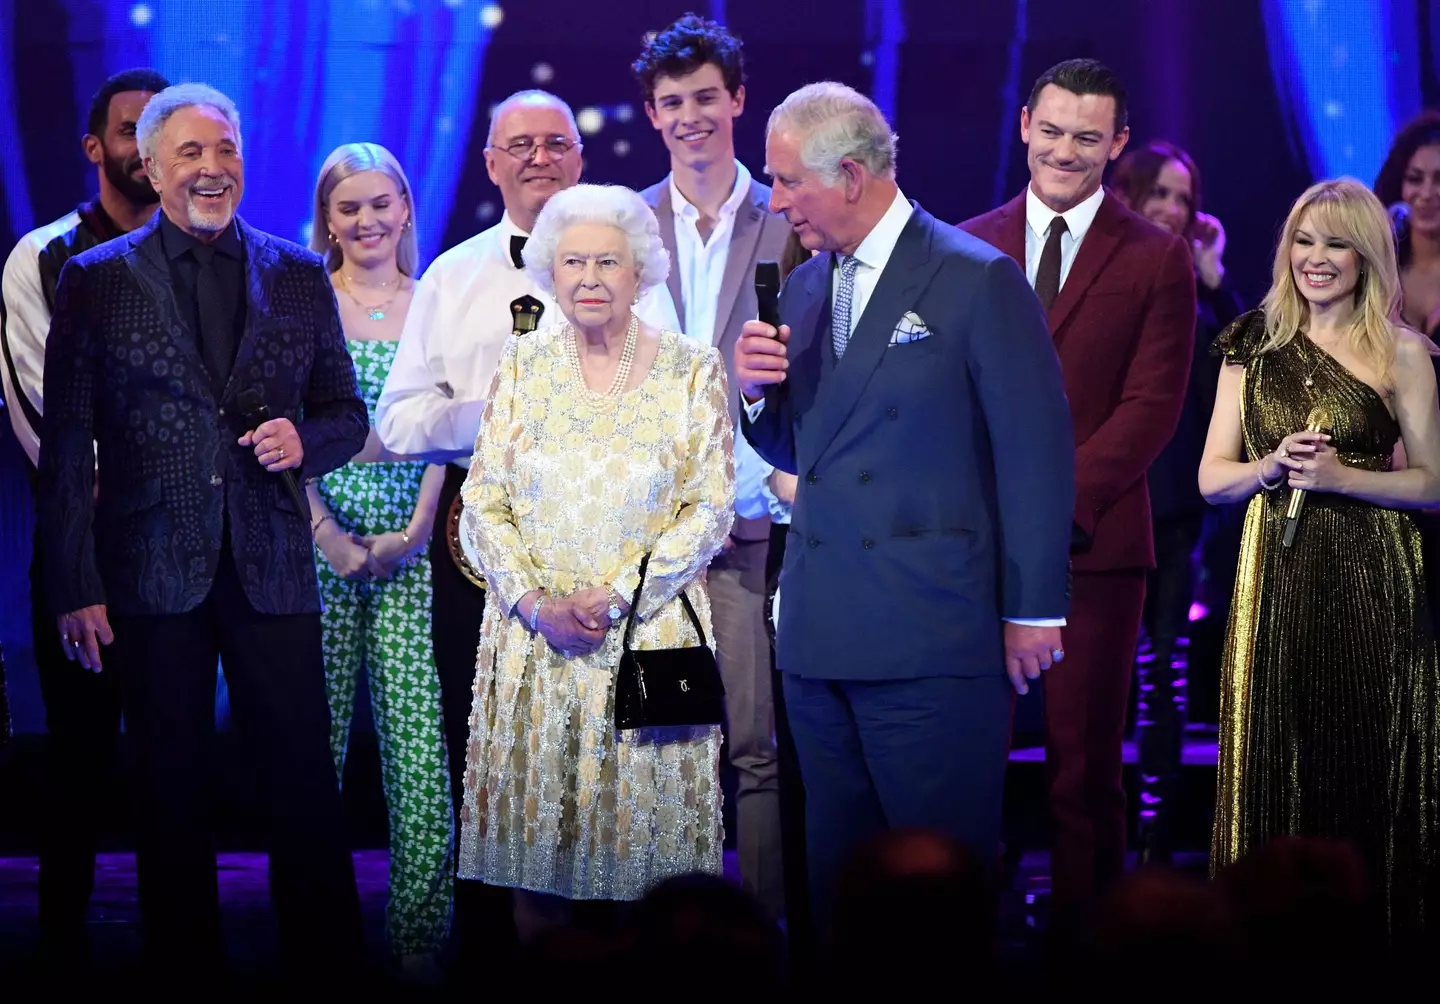 Charles gave a speech during the Queen's birthday celebrations at The Royal Albert Hall in 2018 (